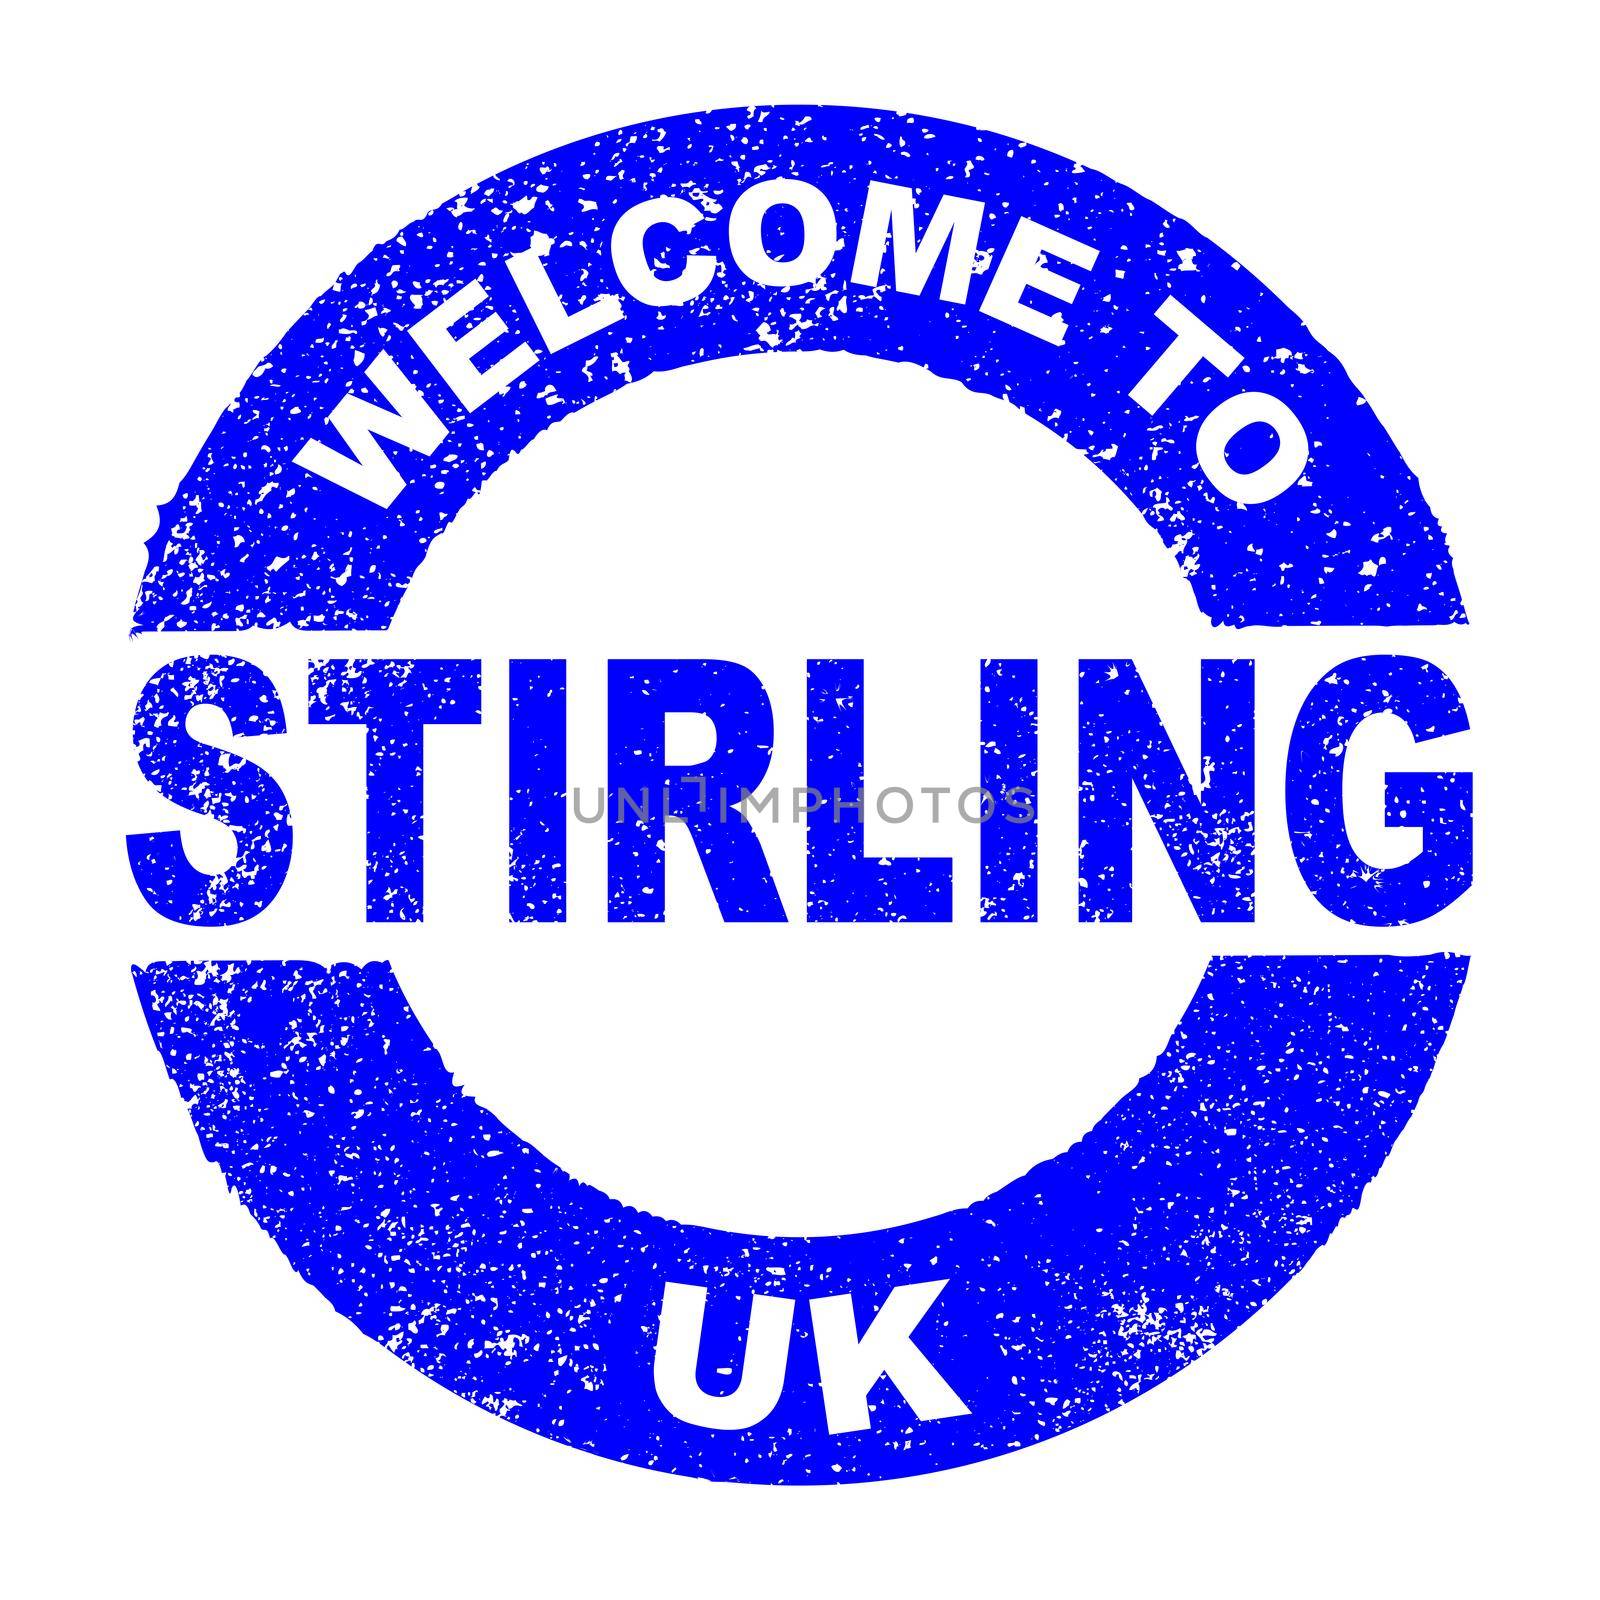 A grunge rubber ink stamp with the text Welcome To Stirling UK over a white background